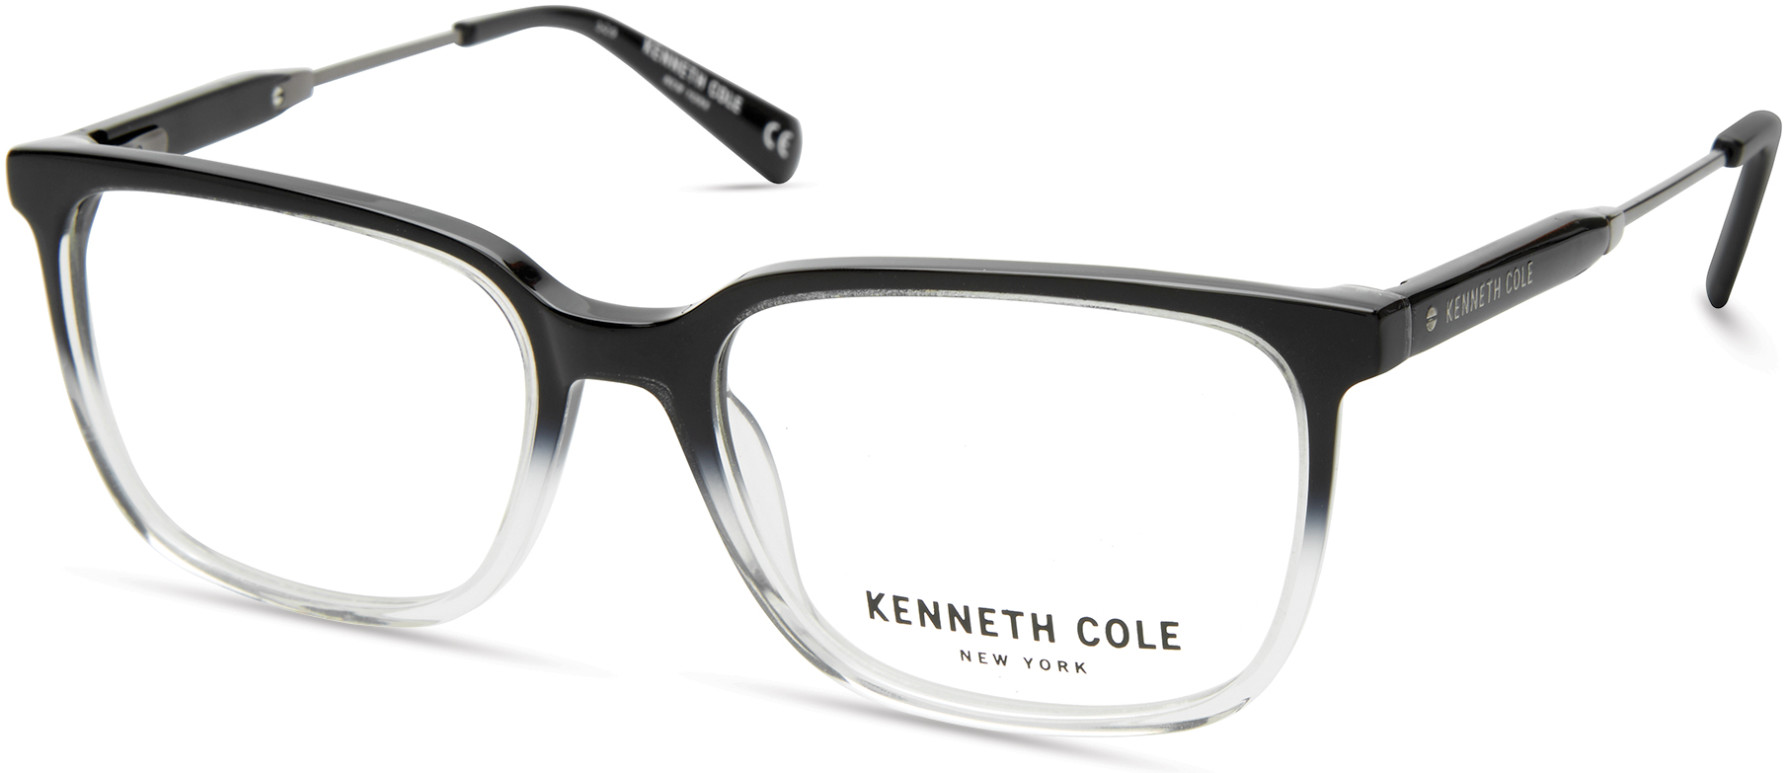 KENNETH COLE NY 0304